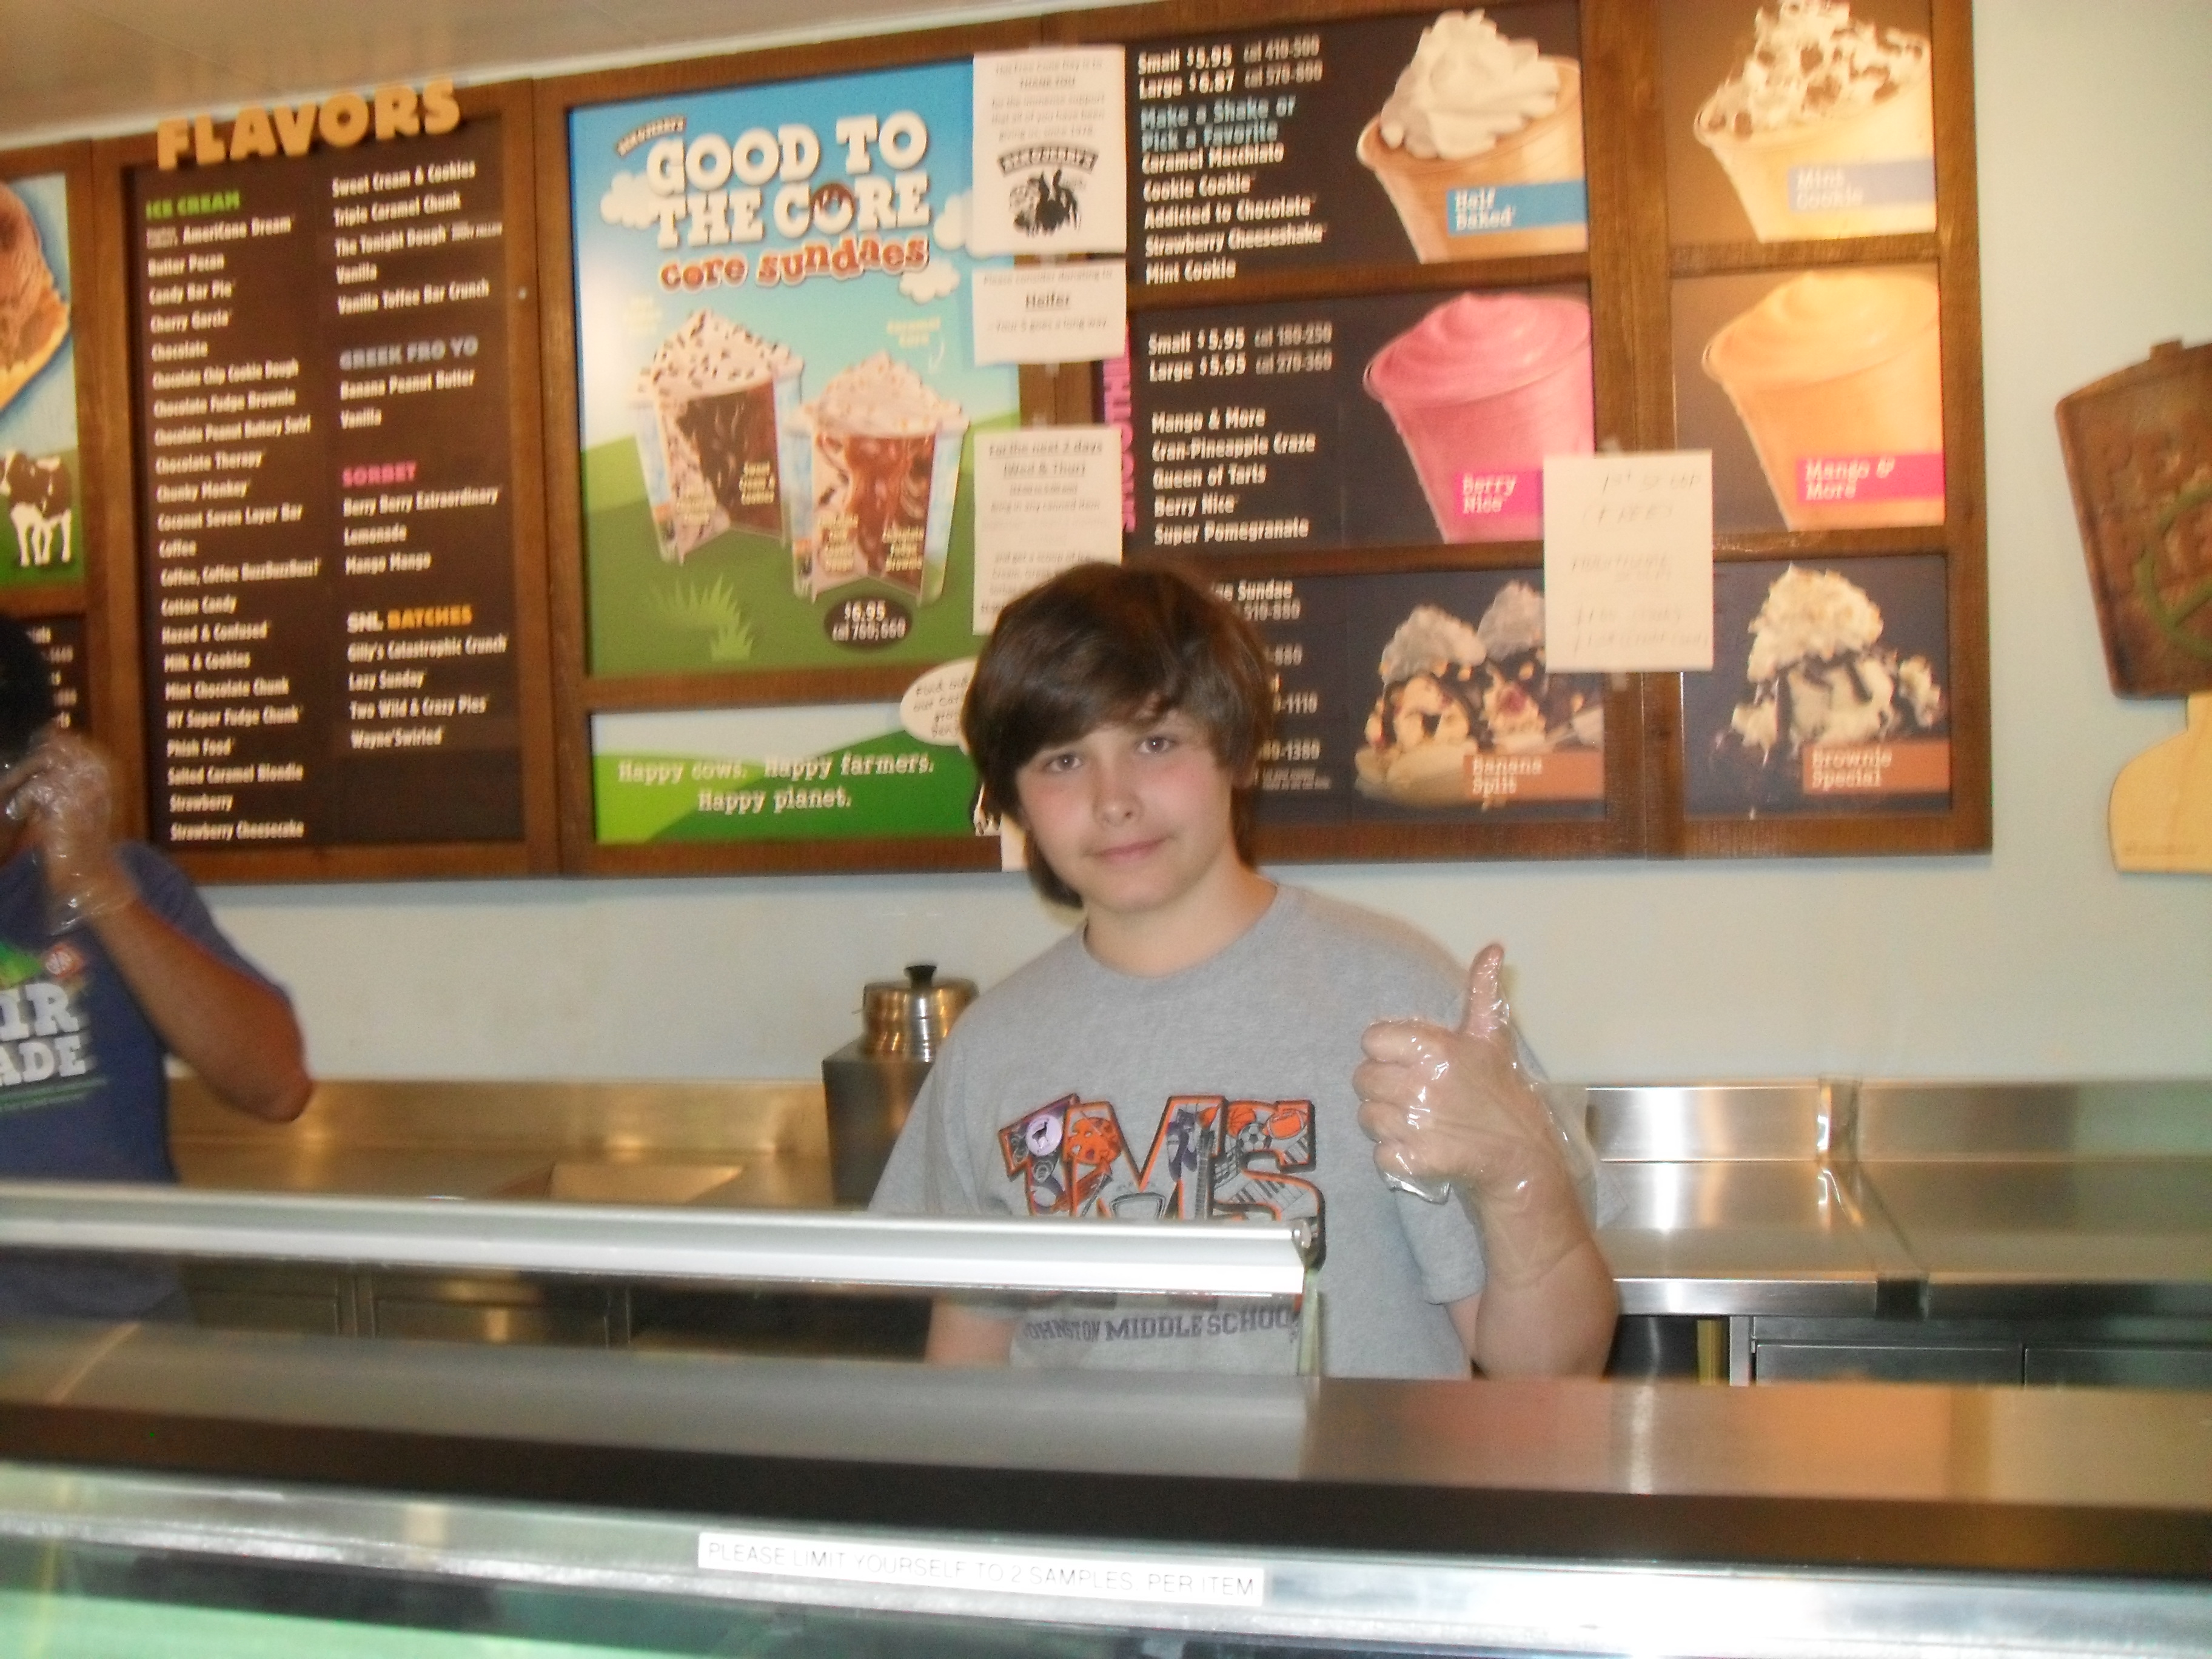 Thumbs up for ice cream and making the world a better place.